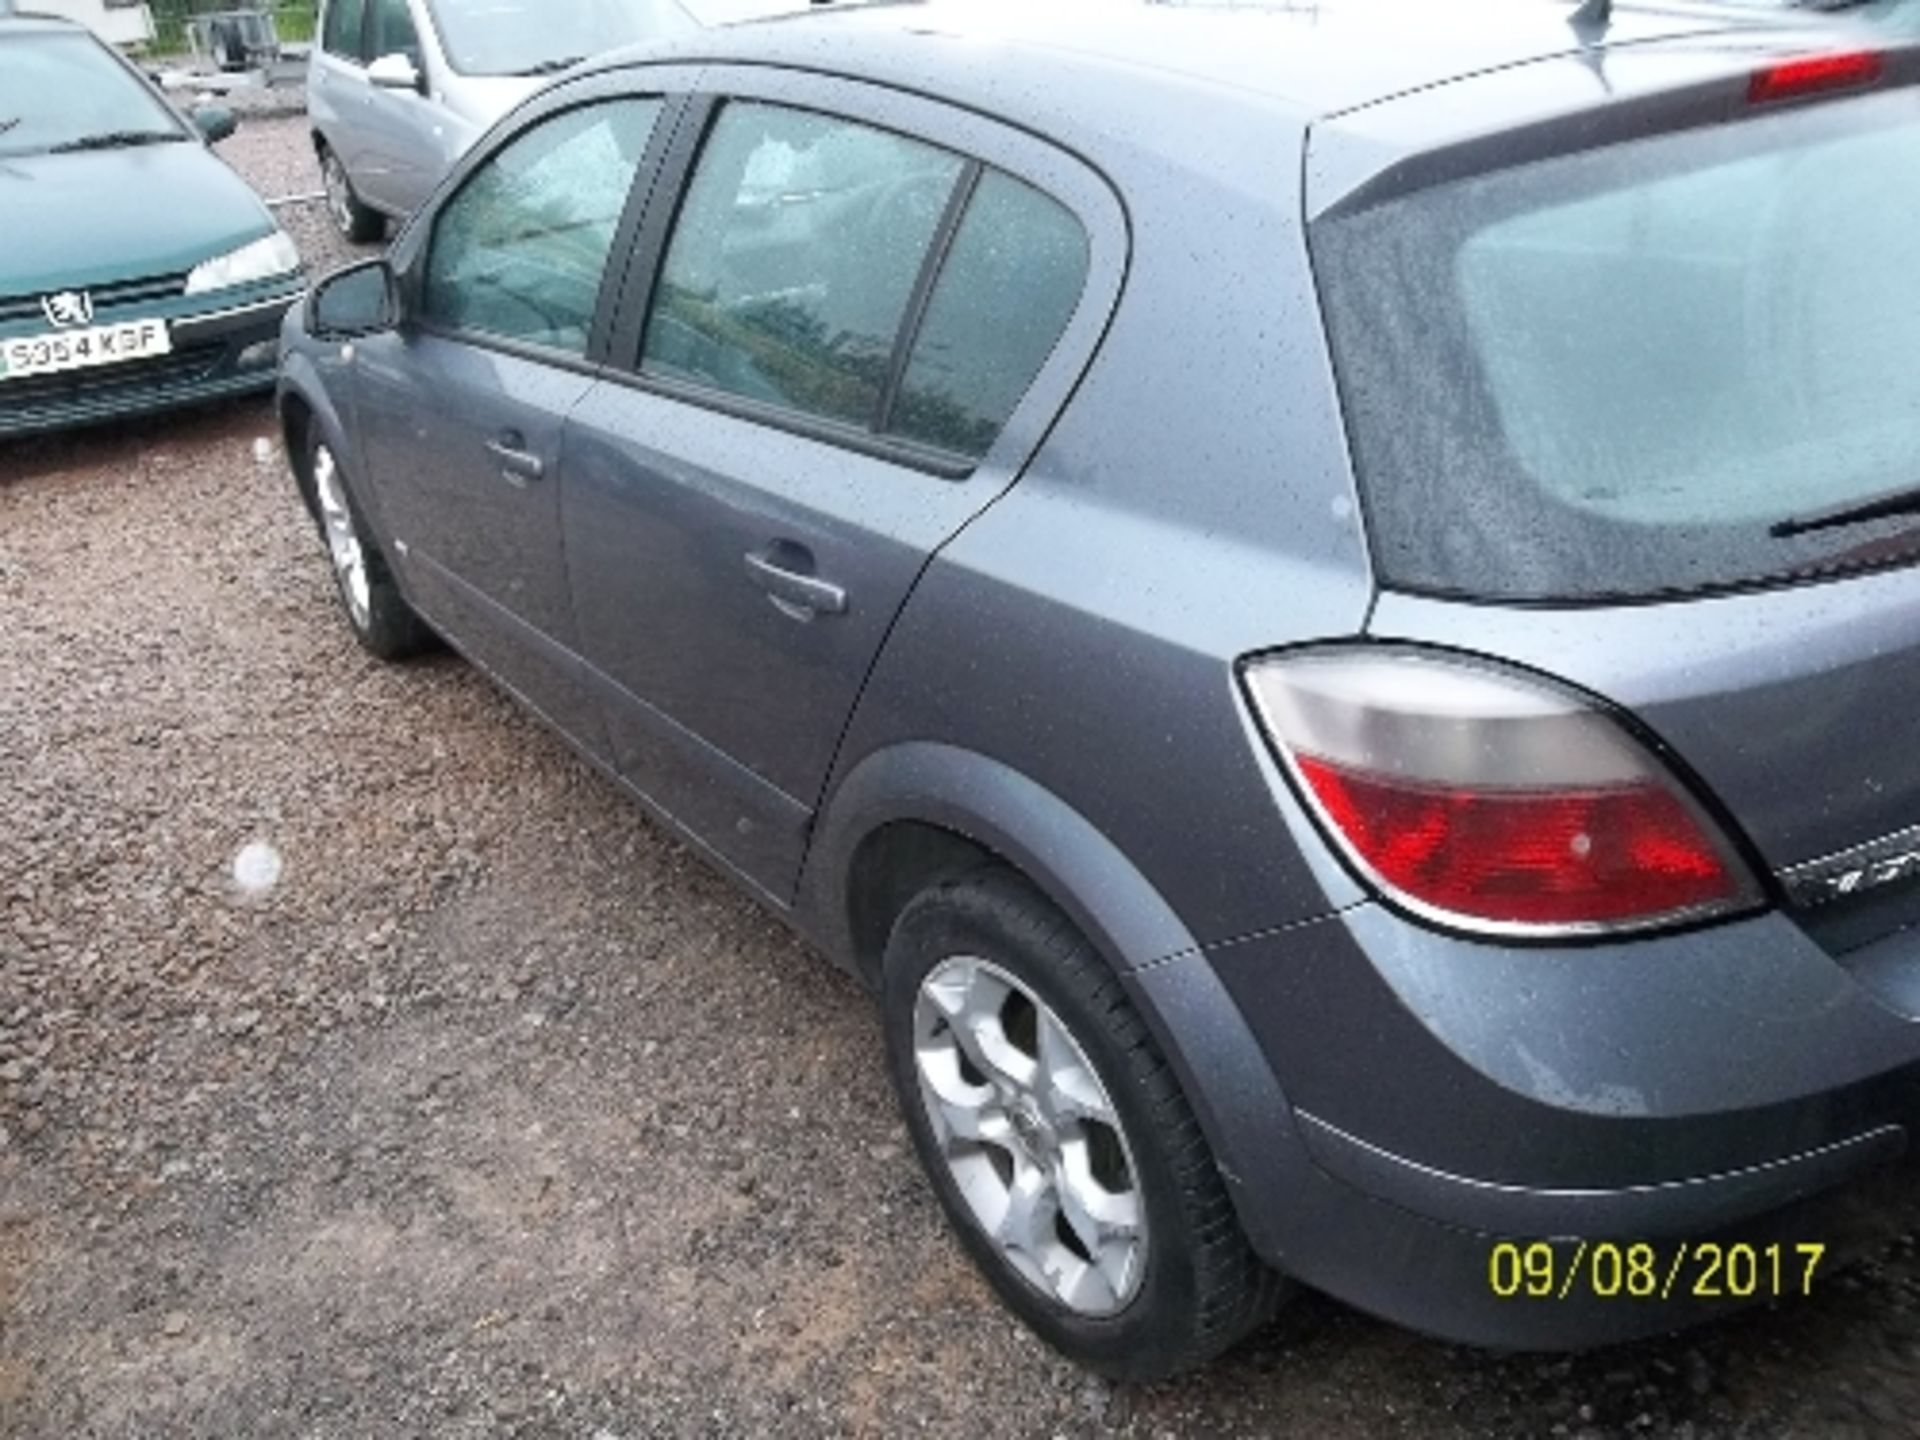 Vauxhall Astra SXI CDTI 100 - WV54 ETX Date of registration: 20.09.2004 1686cc, diesel, manual, grey - Image 4 of 4